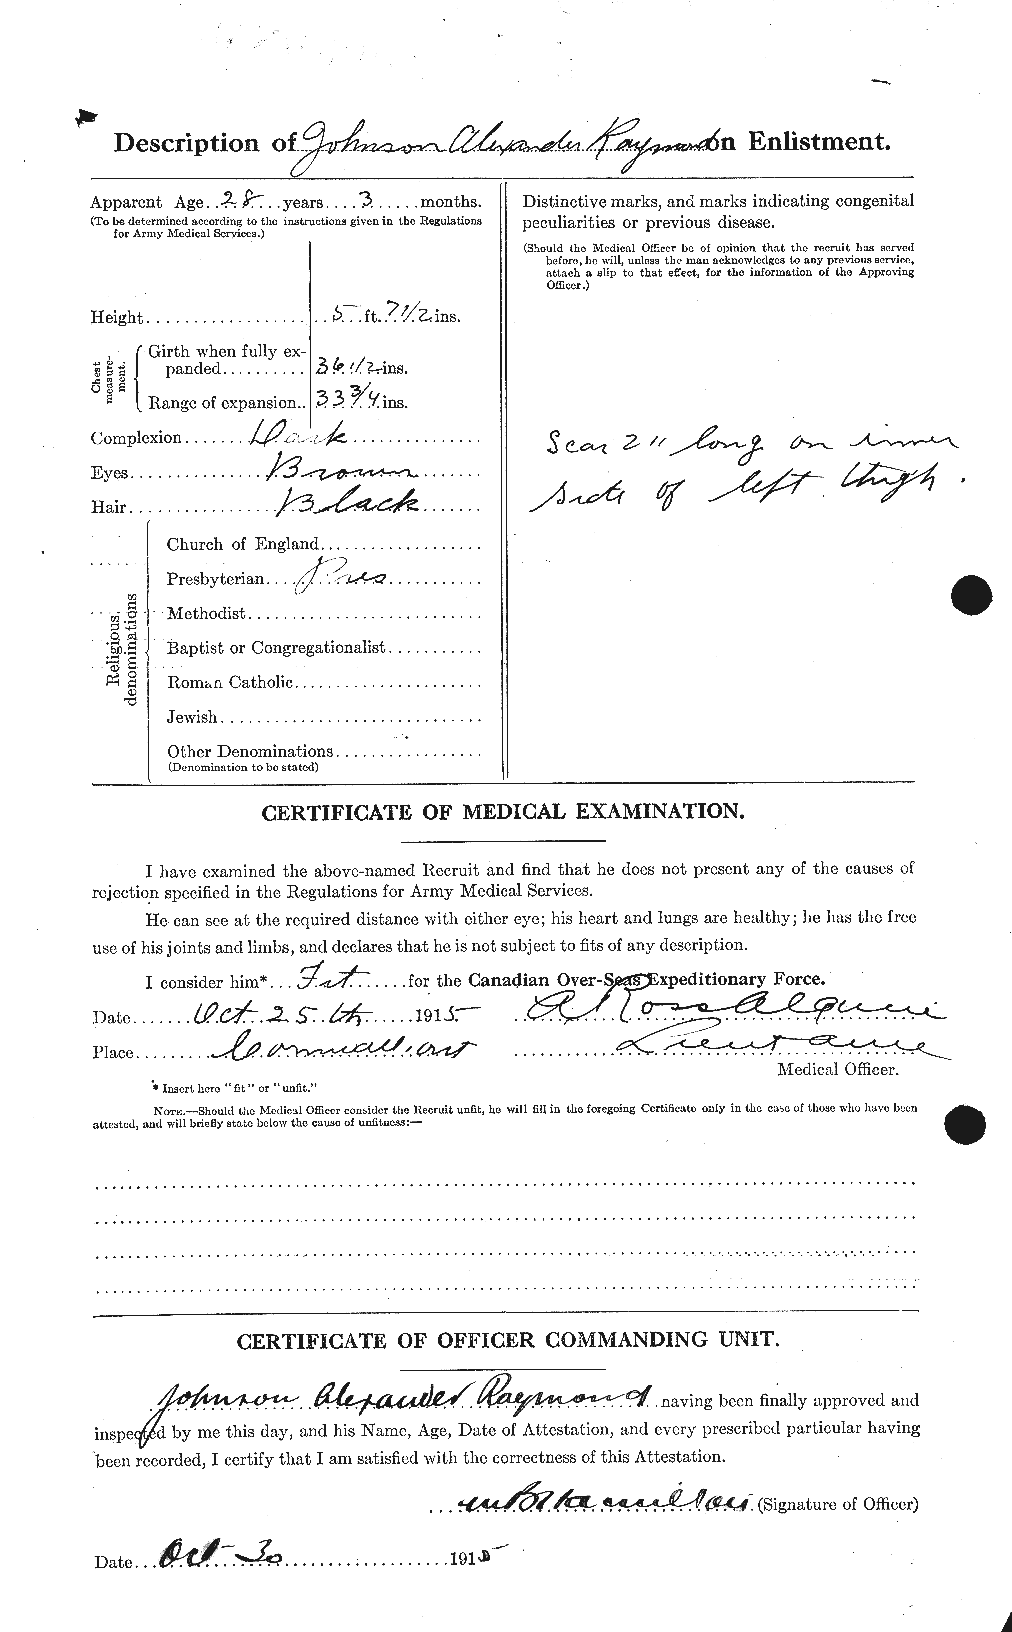 Personnel Records of the First World War - CEF 595383b